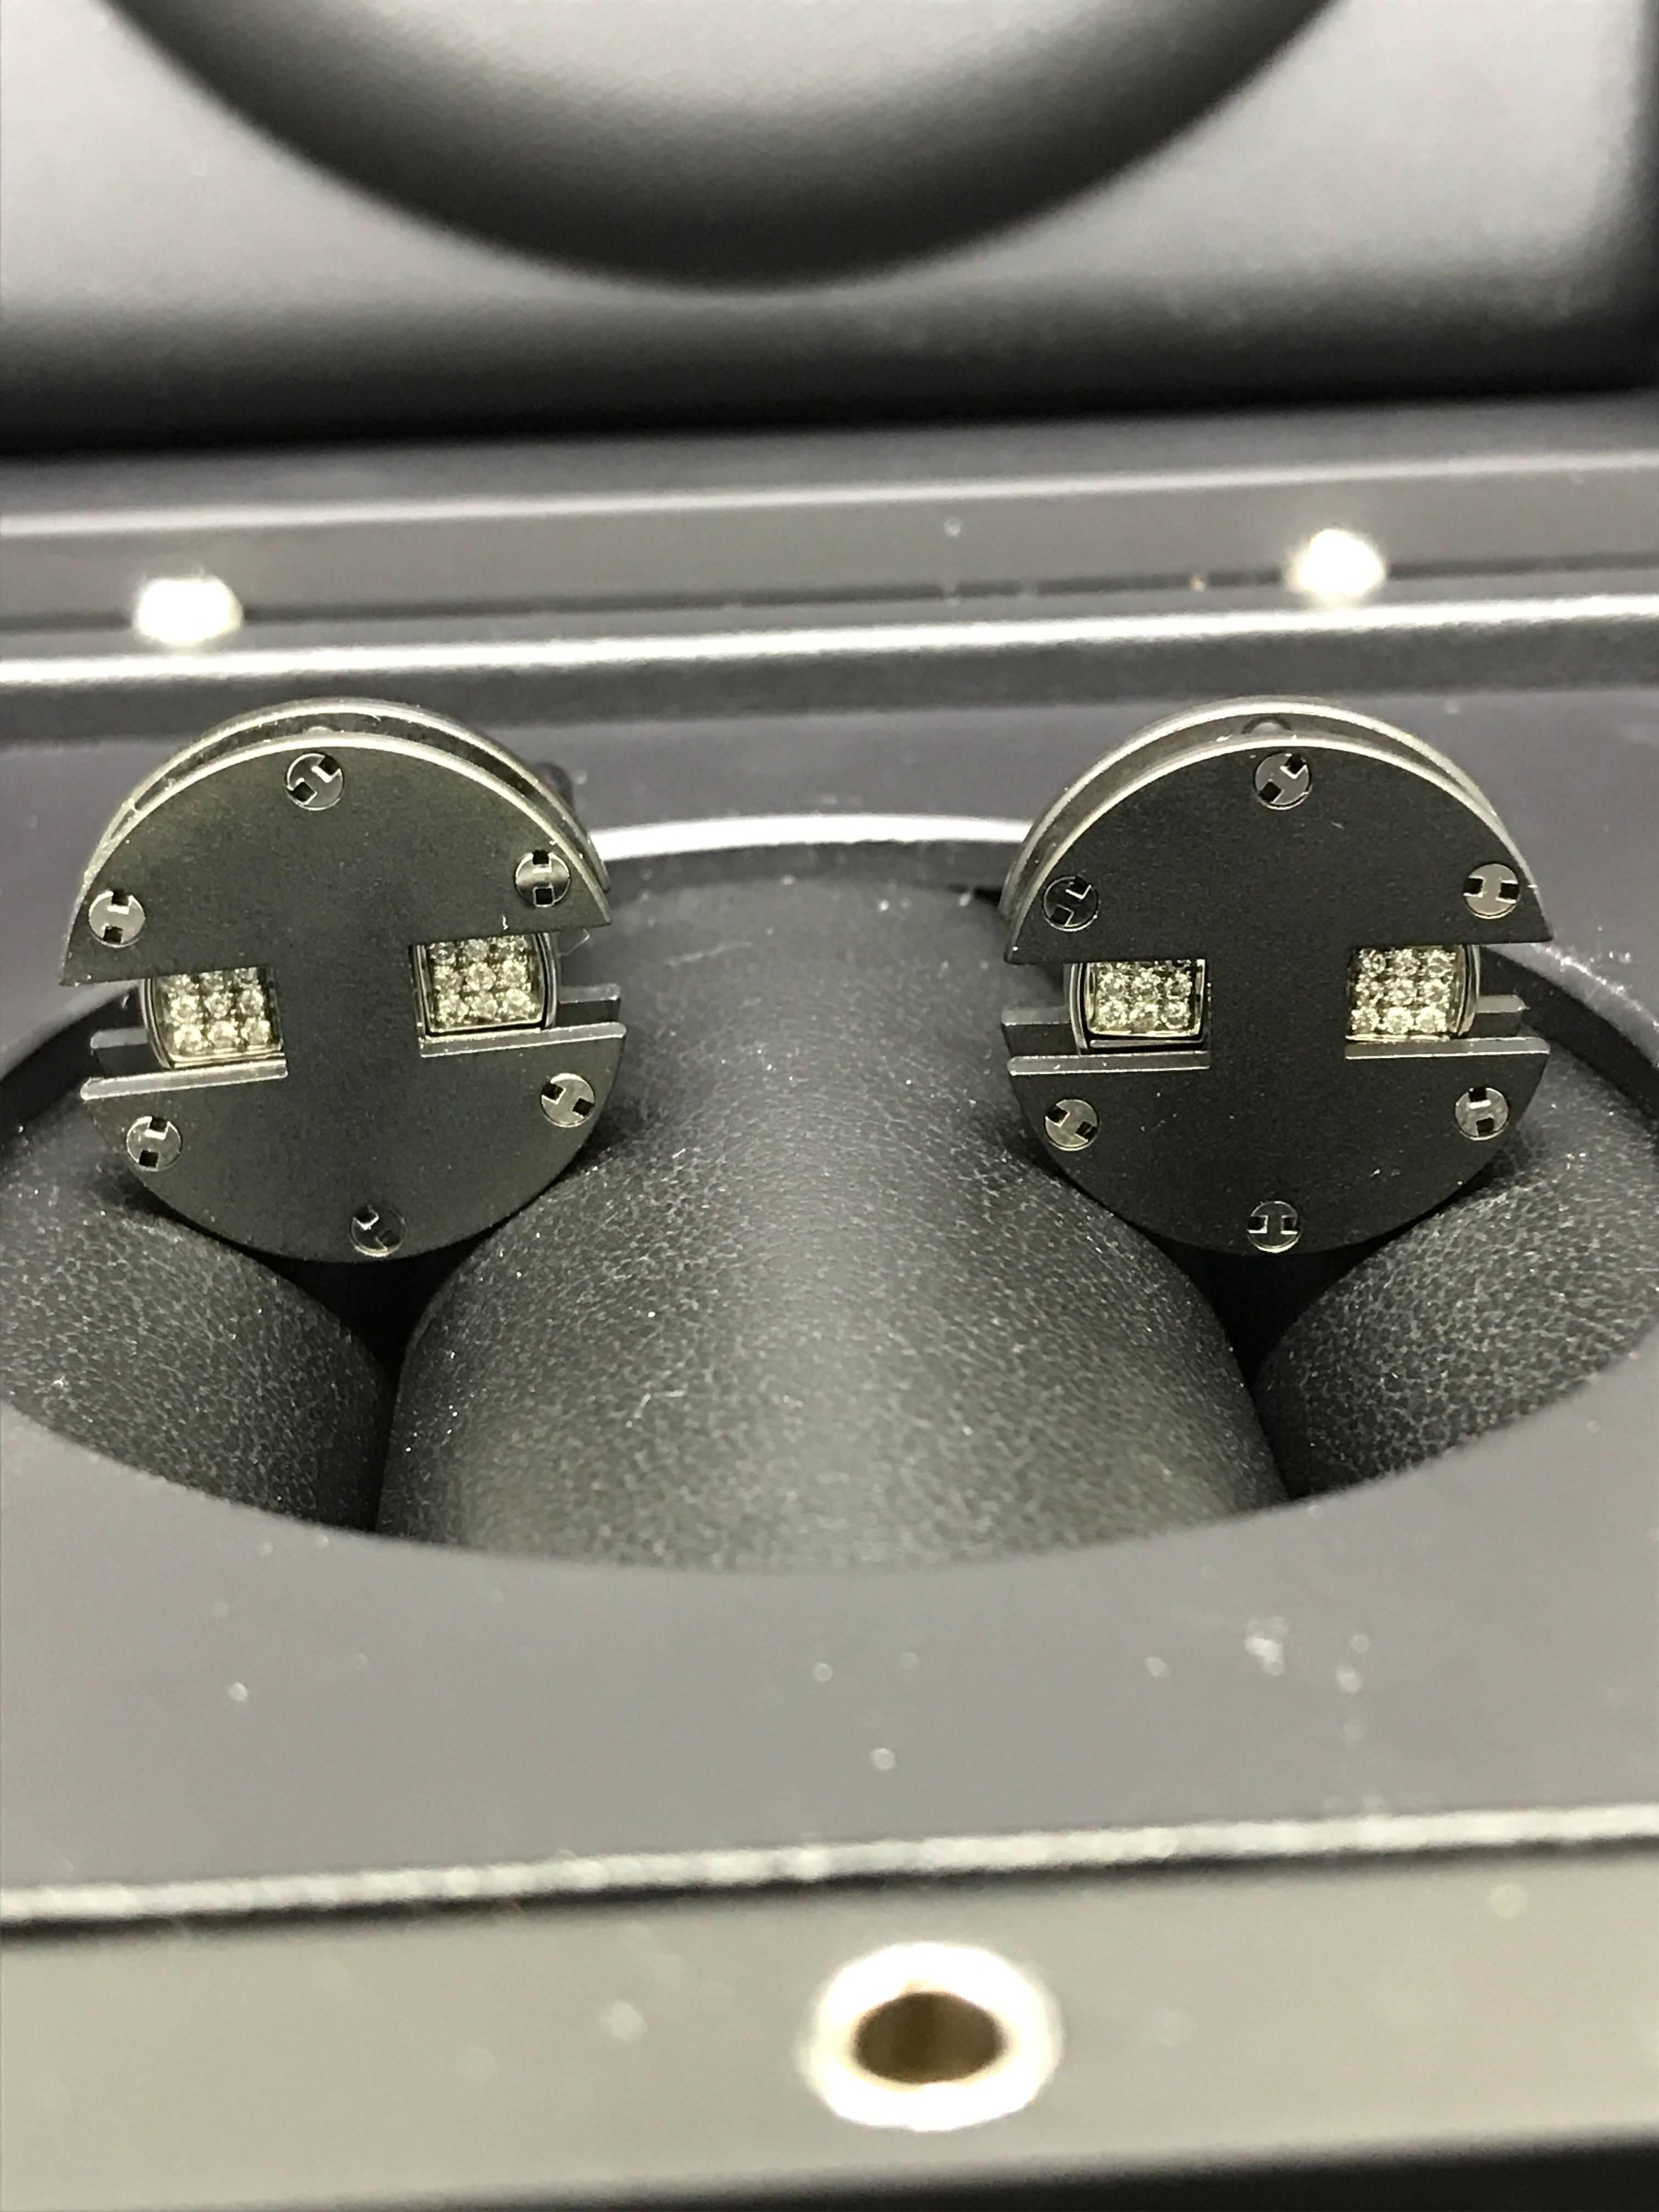 HUBLOT King Power Cuff links

Model number: BM.02.SX-0001

Brand New

Comes with original Hublot box and warranty

Black titanium

Rotating to show diamonds or steel

Perfect match to any Hublot Big Band or King Power watch

Retails for $2,900!!!